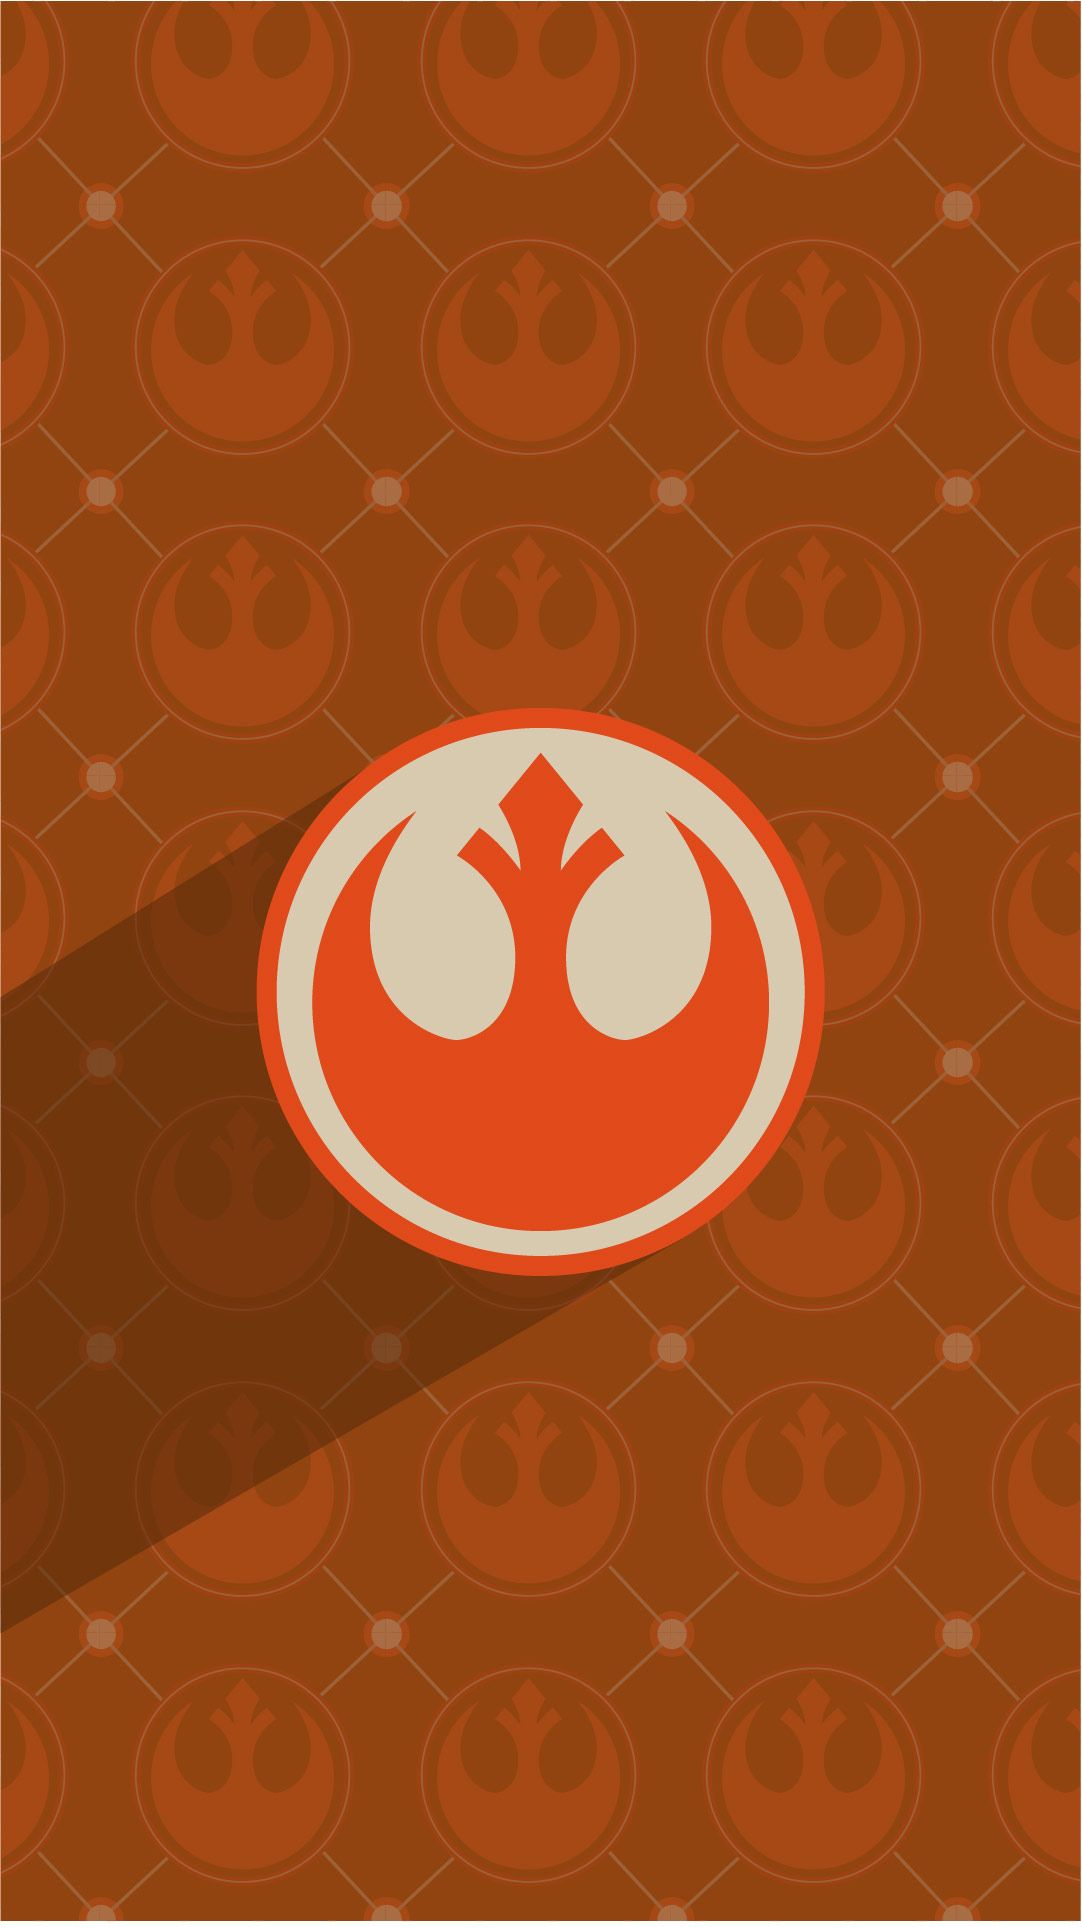 1082x1927 Star Wars Wallpaper For Mobile Devices